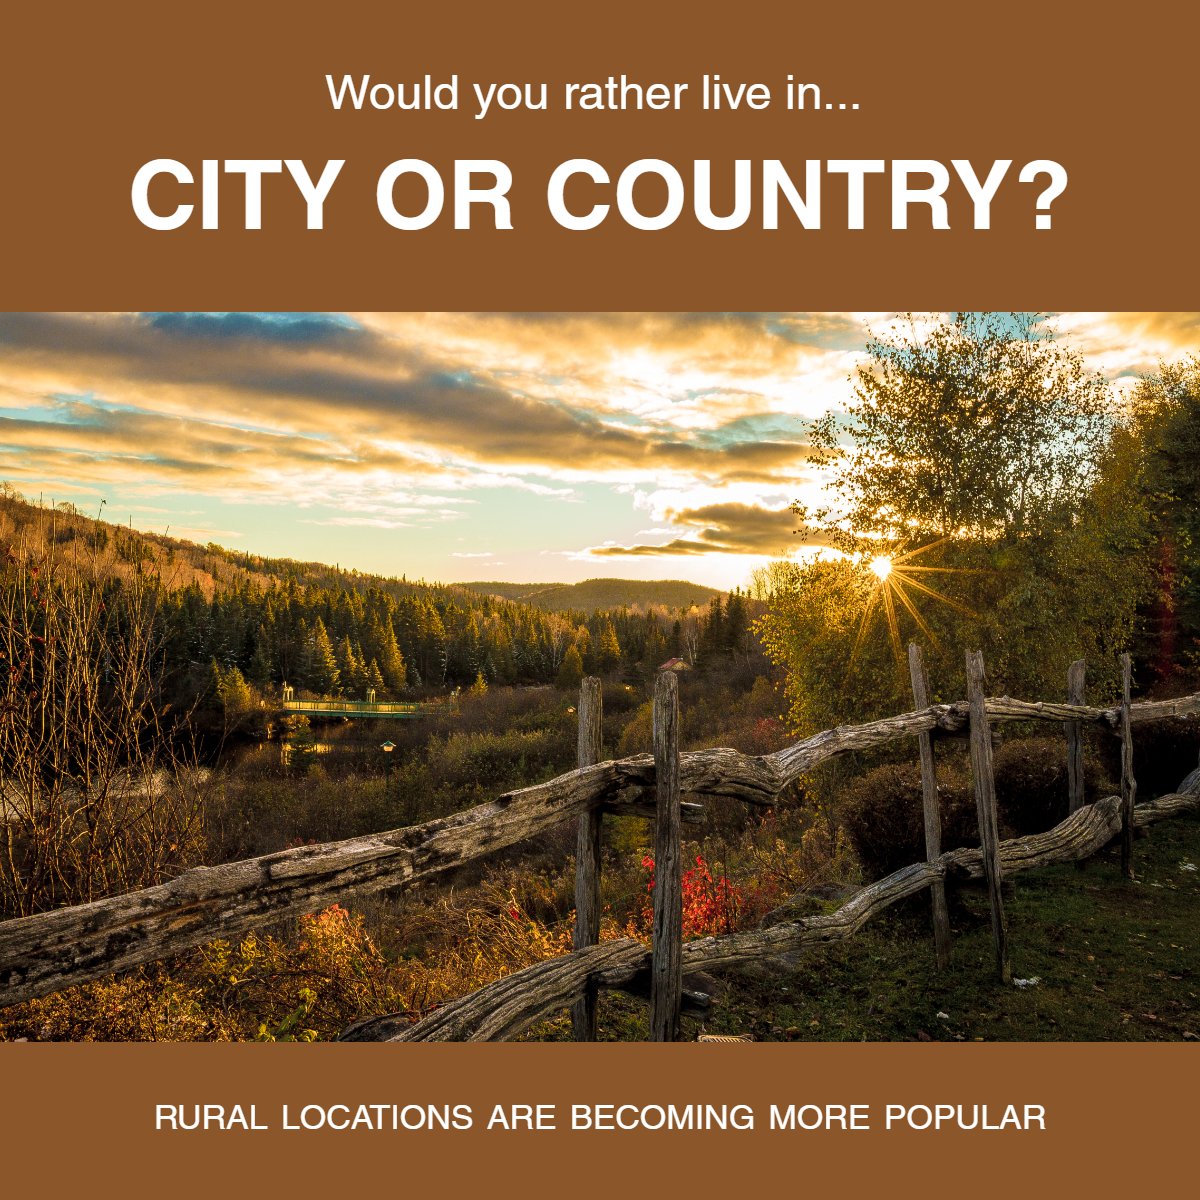 Would you rather live in the city or country? 🏙️🌄

#wouldyourather    #cityorcountry    #citylights    #realestatequestion    #realestate
#LakeNorman #LakeNormanRealty #RealEstate #Denver #Mooresville #ForSale #Home #NewHome #DreamHome #HouseHunting #Property